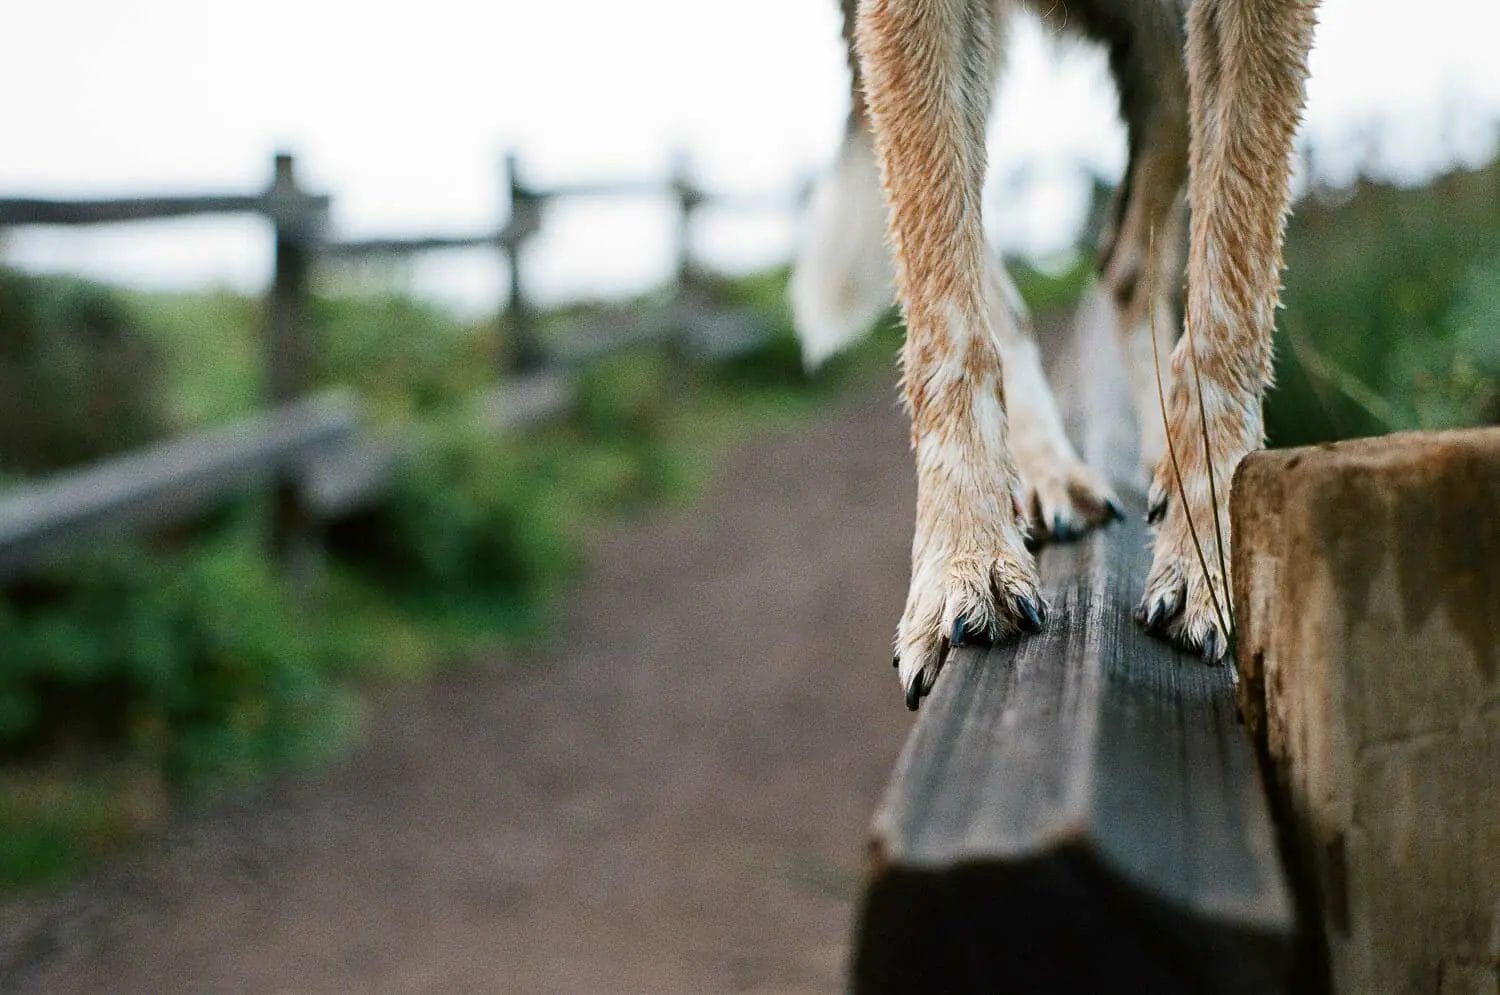 Dog paws resting on a wooden fence along a nature trail.